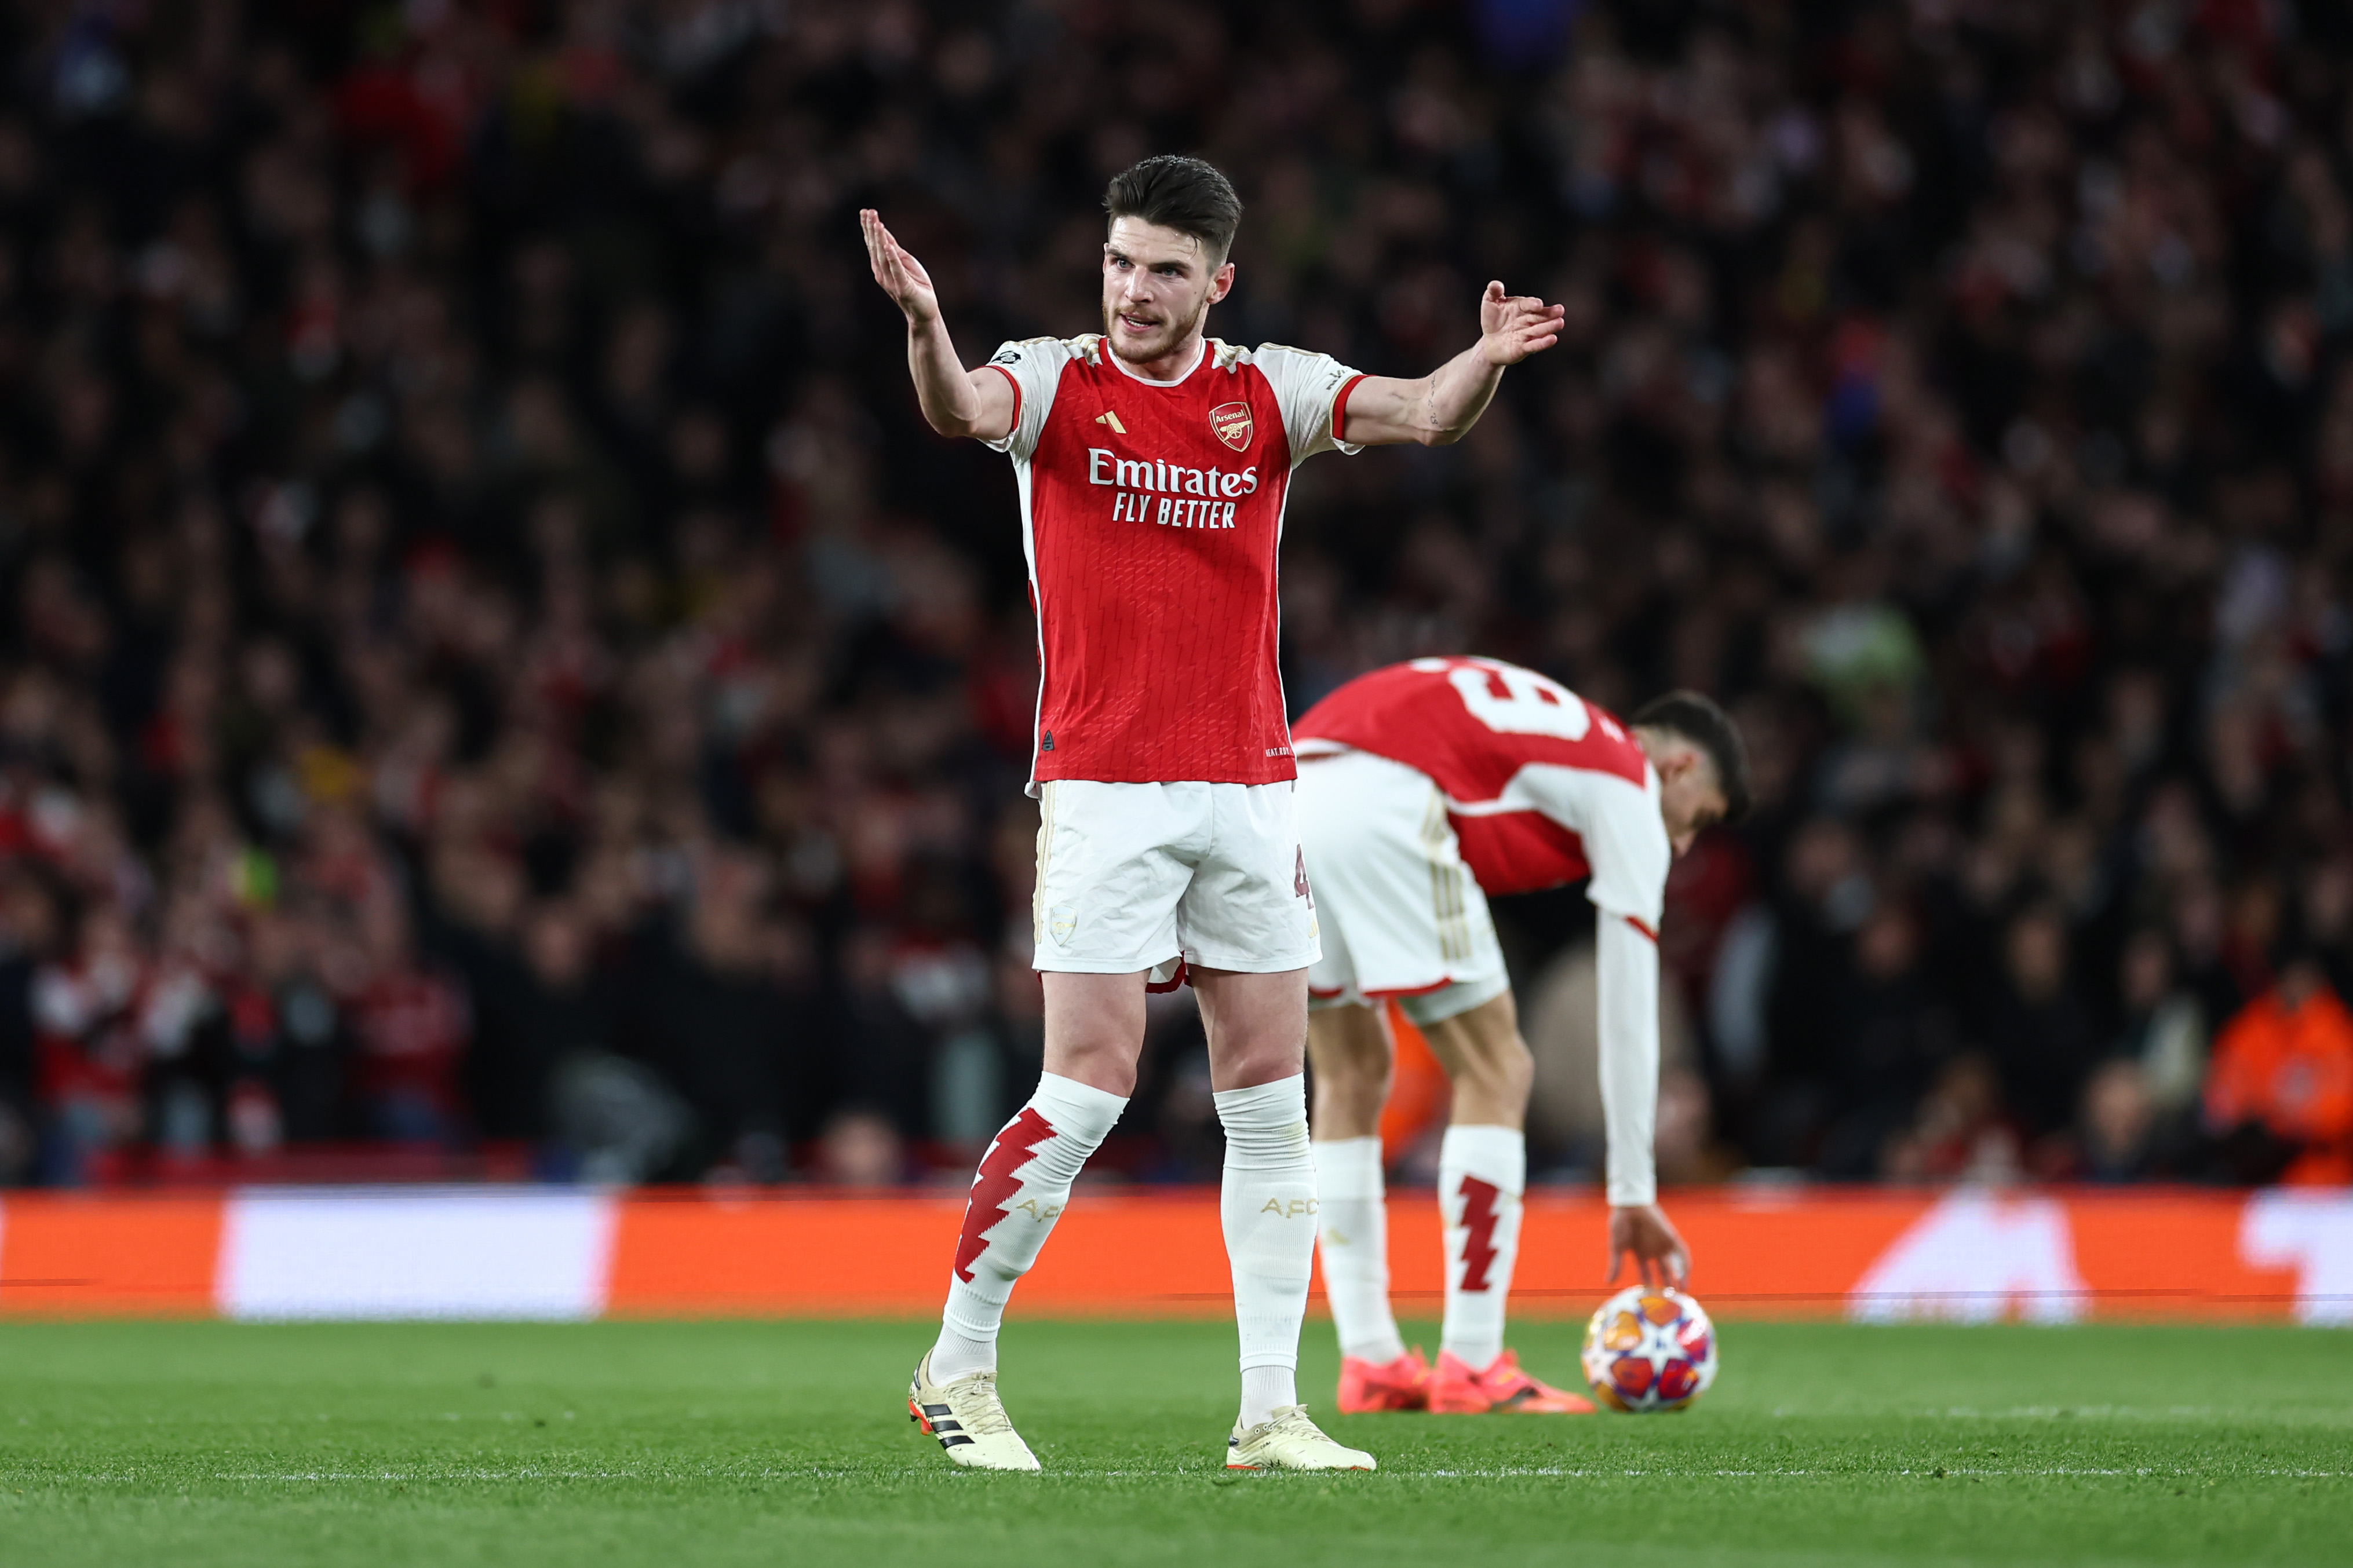 Arsenal player ratings: Ben White the saviour with last-gasp tackle but Declan Rice anonymous vs Bayern Munich